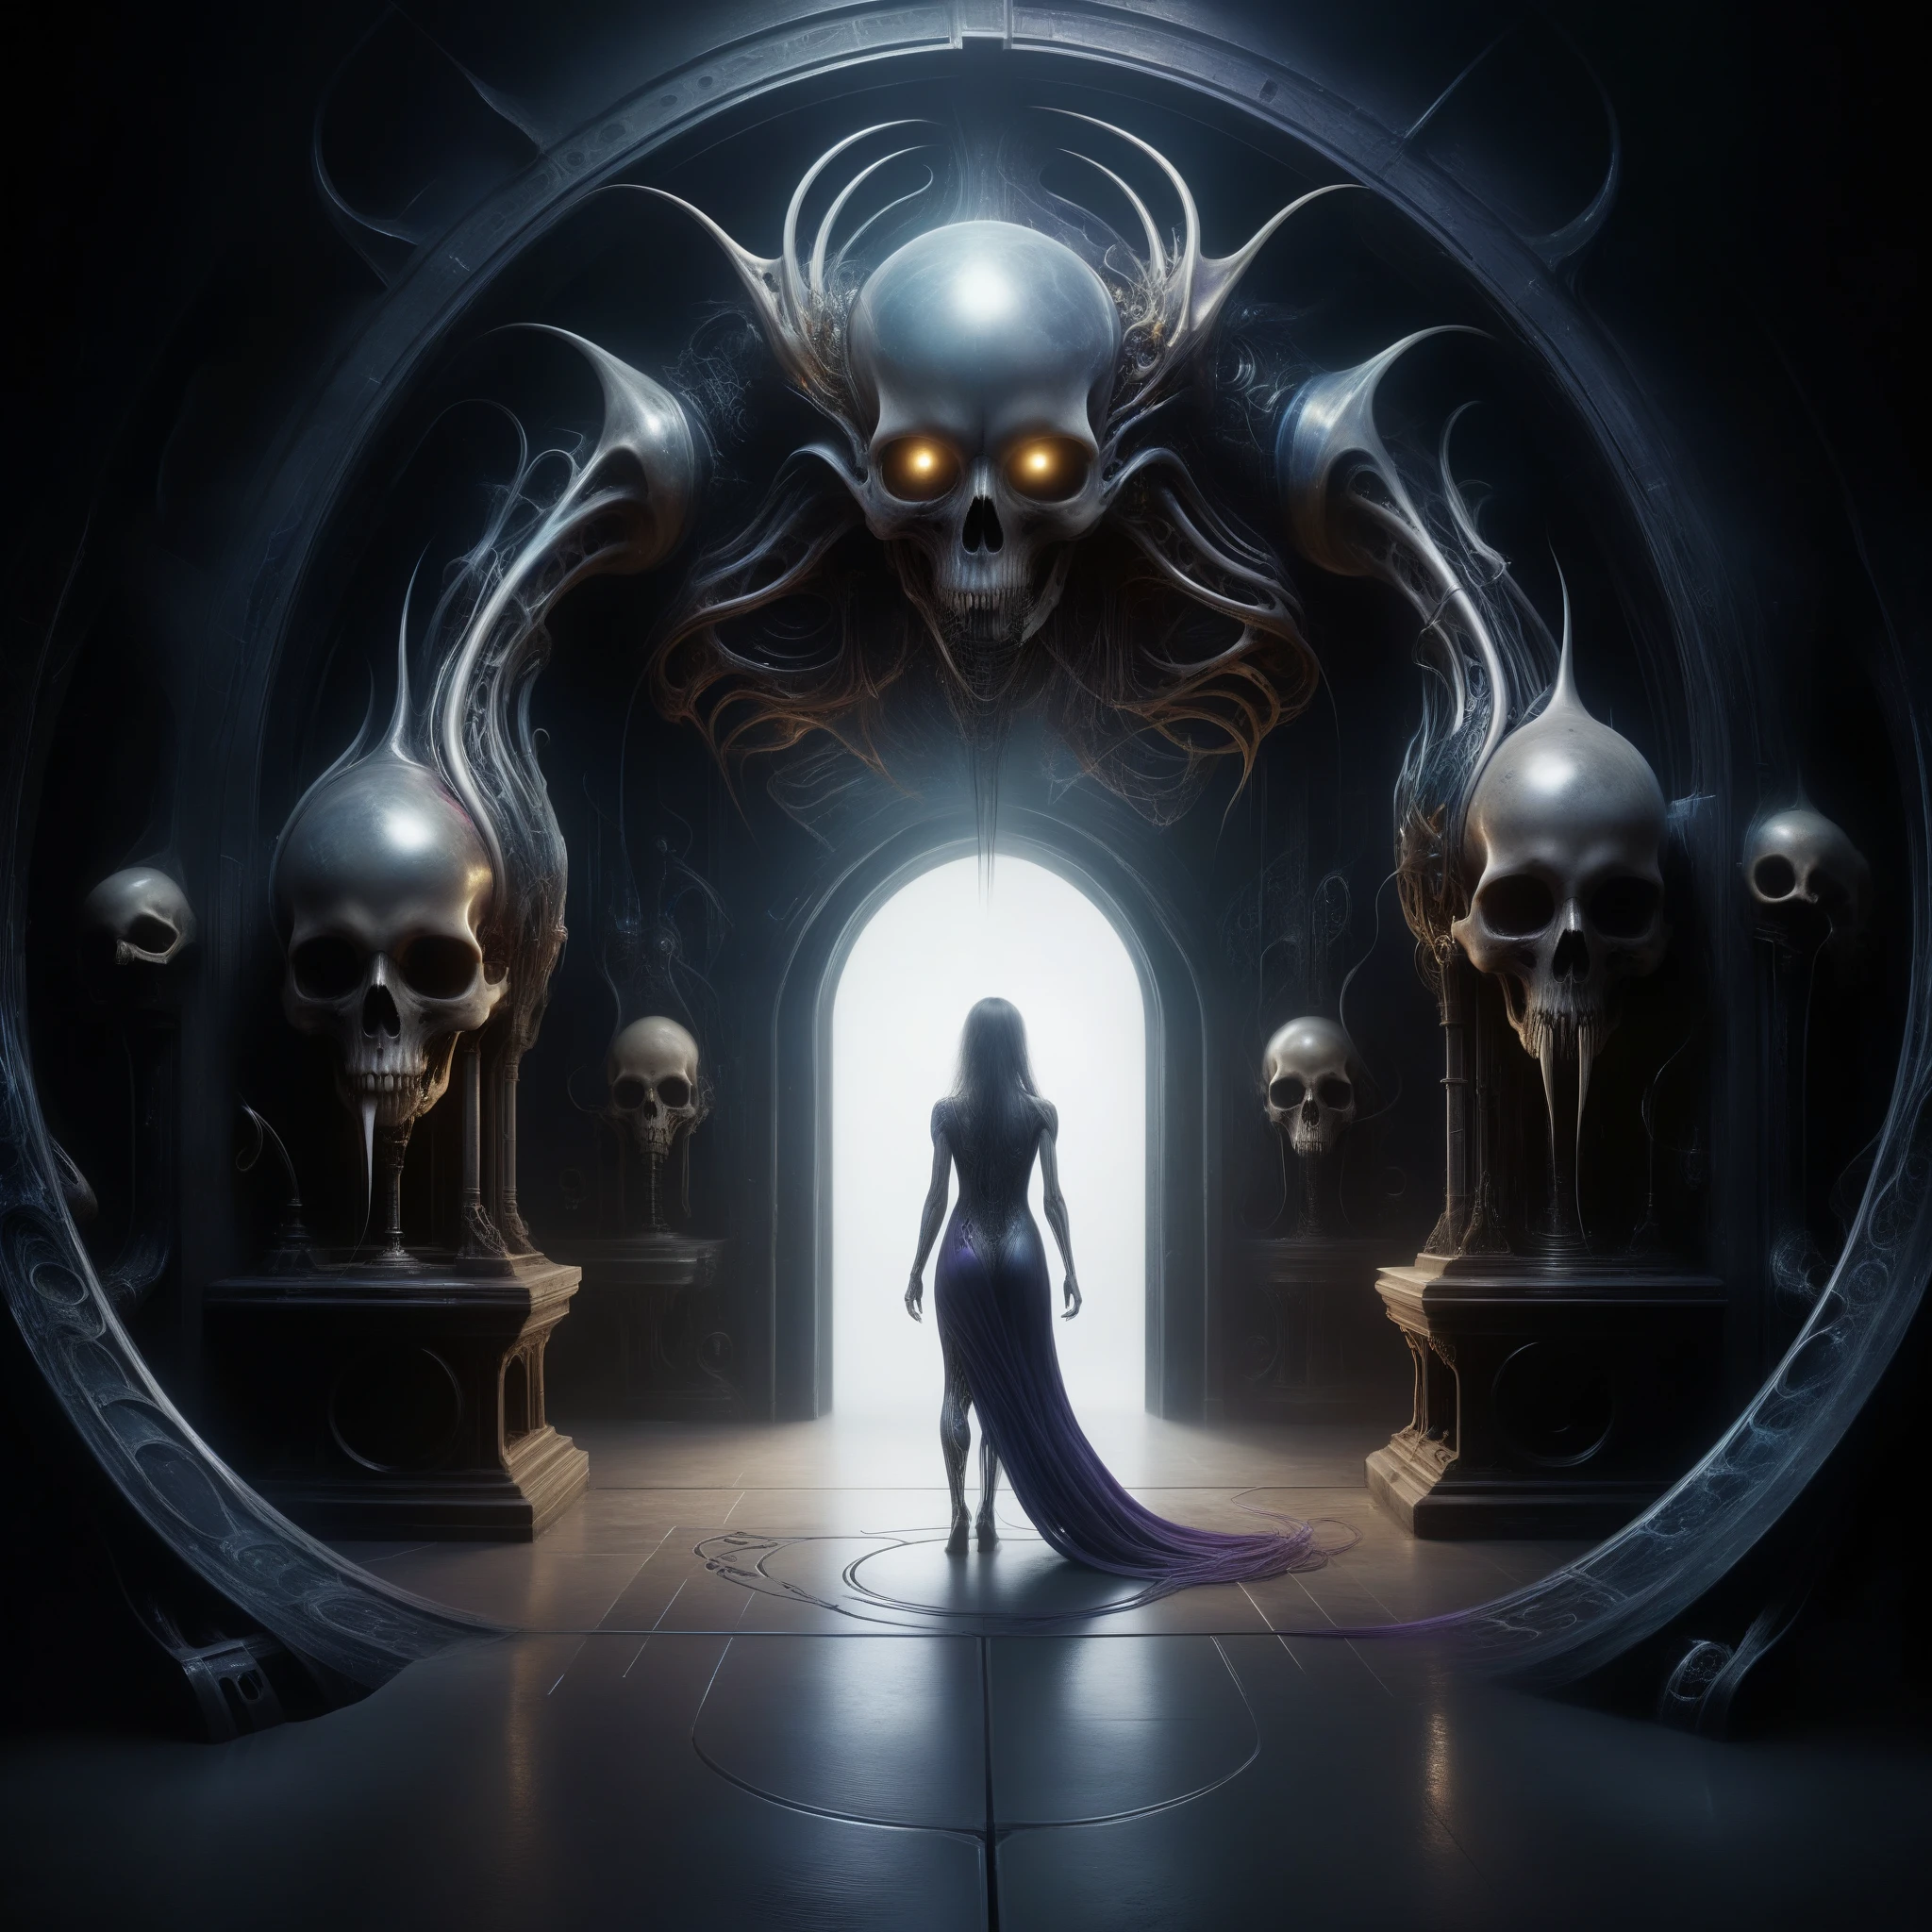 An AI-generated masterpiece depicting a chilling symphony of music resonating from within grotesque, organic structures inspired by H.R. Giger's nightmarish creations. The scene showcases the fusion of art and technology, creating an eerie and surreal ambiance. The image portrays the following elements:

- (best quality, 4k, highres, masterpiece:1.2), ultra-detailed, (realistic, photorealistic, photo-realistic:1.37) rendering: The image is of the highest quality, with intricate details and lifelike textures. The lighting and shadows are meticulously crafted to create a realistic atmosphere.

- Grotesque, organic structures: These otherworldly structures are reminiscent of H.R. Giger's signature style, blending bio-mechanical elements with hauntingly beautiful aesthetics. The intricate details of the structures convey a sense of dark elegance.

- AI-generated music: The air is filled with an ethereal symphony, harmonizing with the surroundings. The music is an AI-generated composition, creating a unique, haunting experience for the viewer.

- Eerie ambiance: The scene exudes a chilling atmosphere, with hints of suspense and mystery. The lighting is subdued but strategically placed to enhance the unsettling mood. Shadows dance across the grotesque structures, adding depth and drama.

- Surreal elements: The image presents a surreal setting that merges the boundaries between reality and dreams. It sparks the imagination and invites viewers to explore the darkest corners of their minds.

- Cinematic color palette: The color palette consists of deep, rich tones, enhancing the eerie atmosphere. Shades of dark blues, purples, and blacks dominate the scene, adding a sense of unease and mystery.

- Unconventional perspectives: The composition features unconventional angles and perspectives, allowing the viewer to immerse themselves in the surreal world. The distorted viewpoints add to the unsettling nature of the image.

- Attention to detail: Every element of the image is m